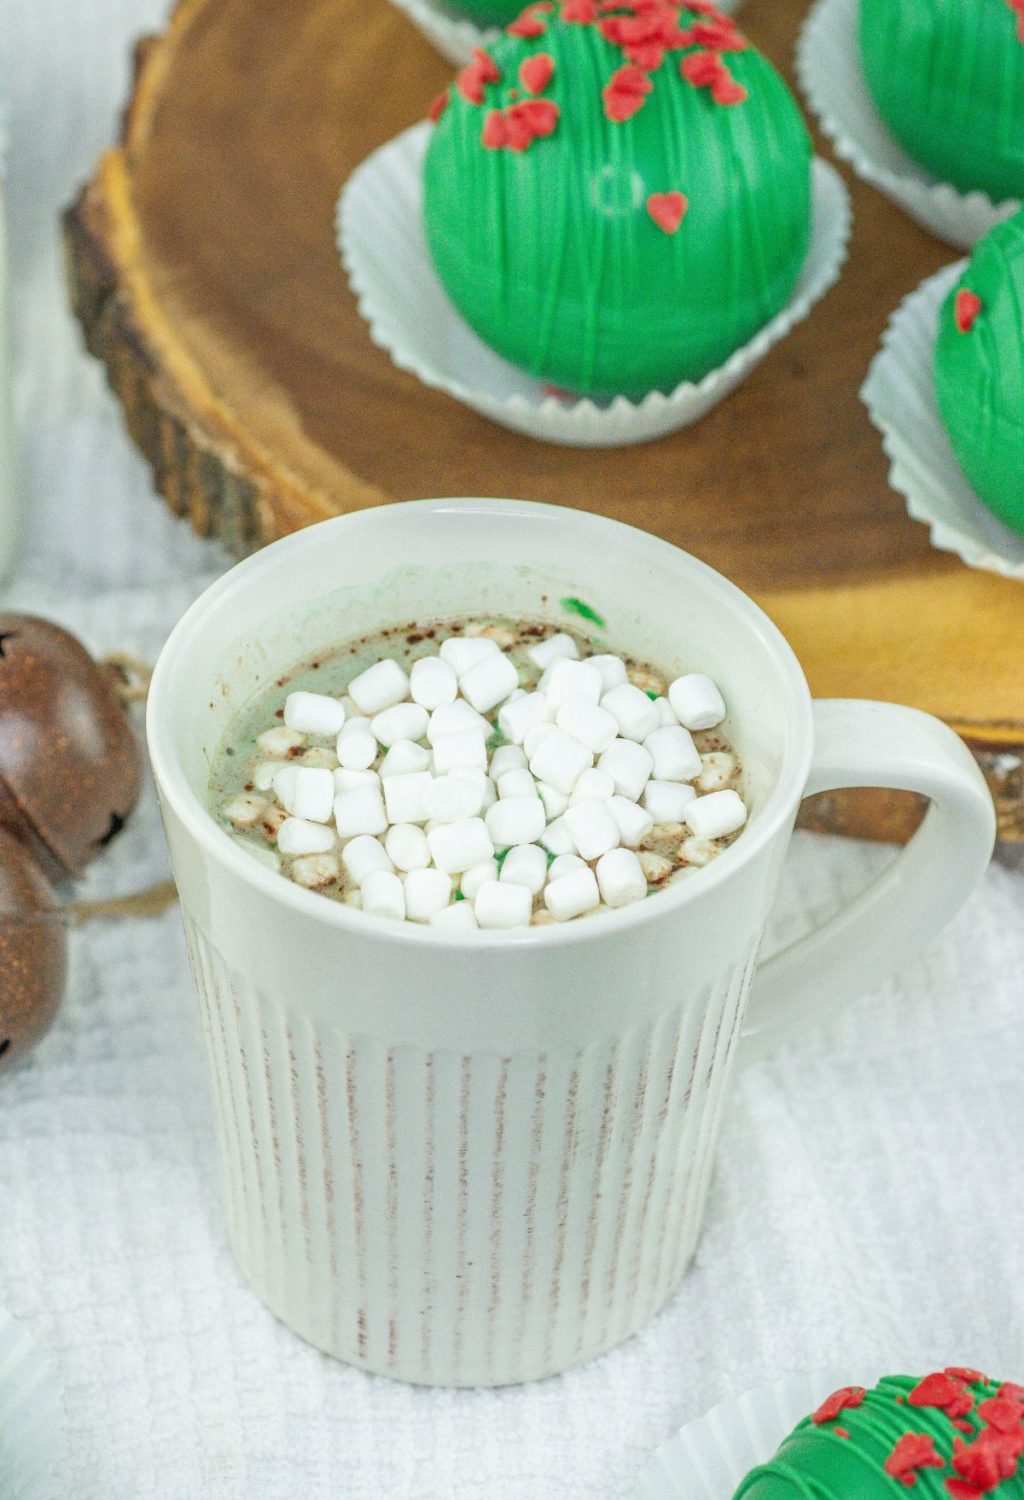 A cup of hot chocolate with marshmallows and green sprinkles.